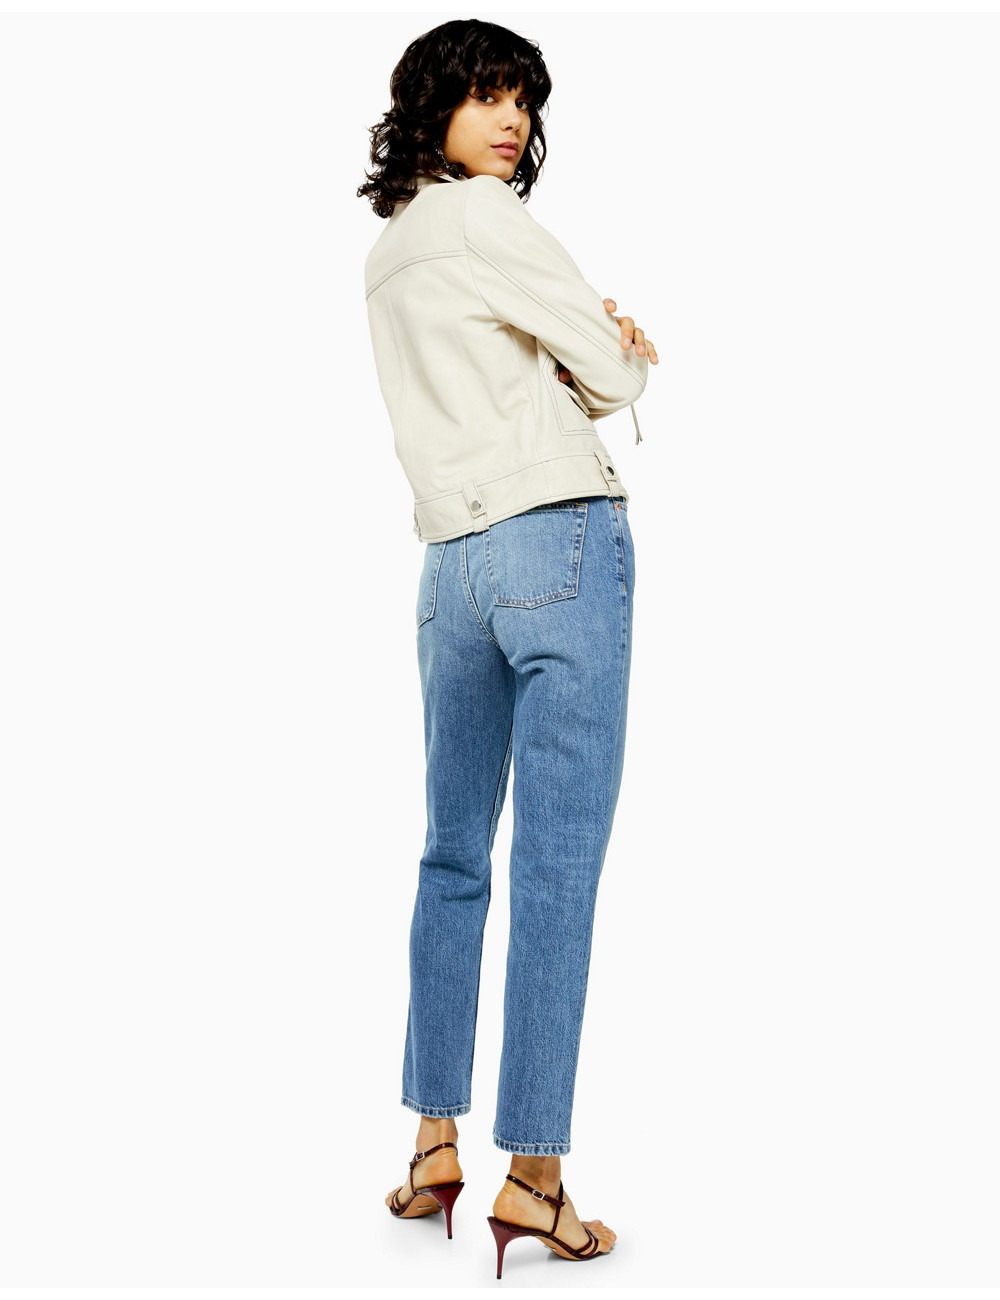 Topshop Tall Editor jeans...